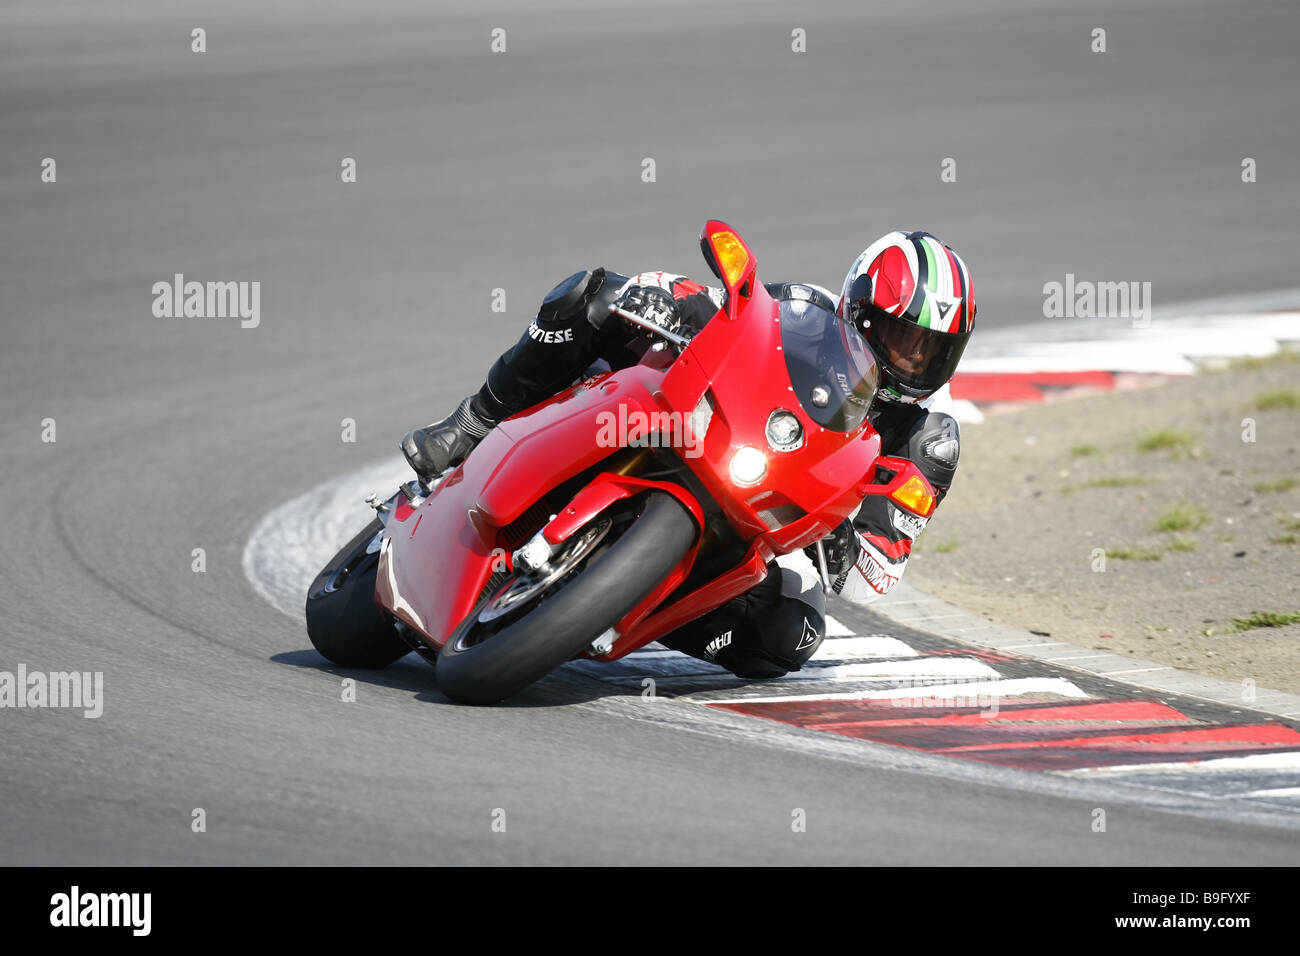 Racetrack motorcyclists curve-situation street curve people motorcycle motor-biking traffic drives hobby leisure time speed fun Stock Photo